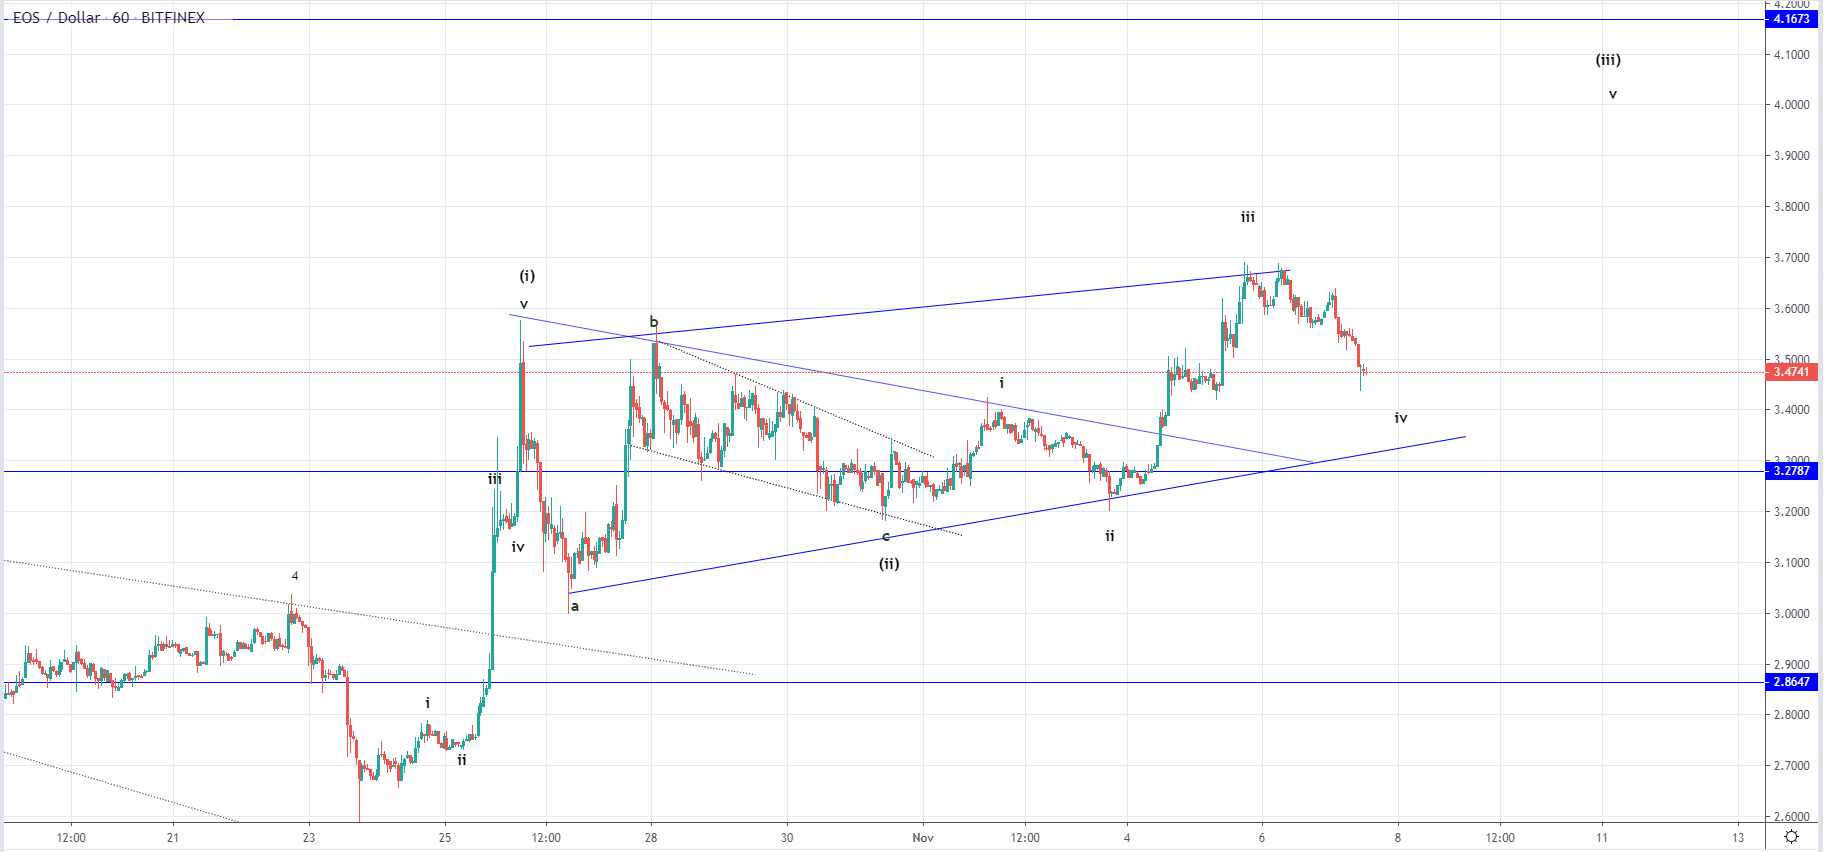 LTC and EOS - Breakout seen from the triangle but not from the ascending channel